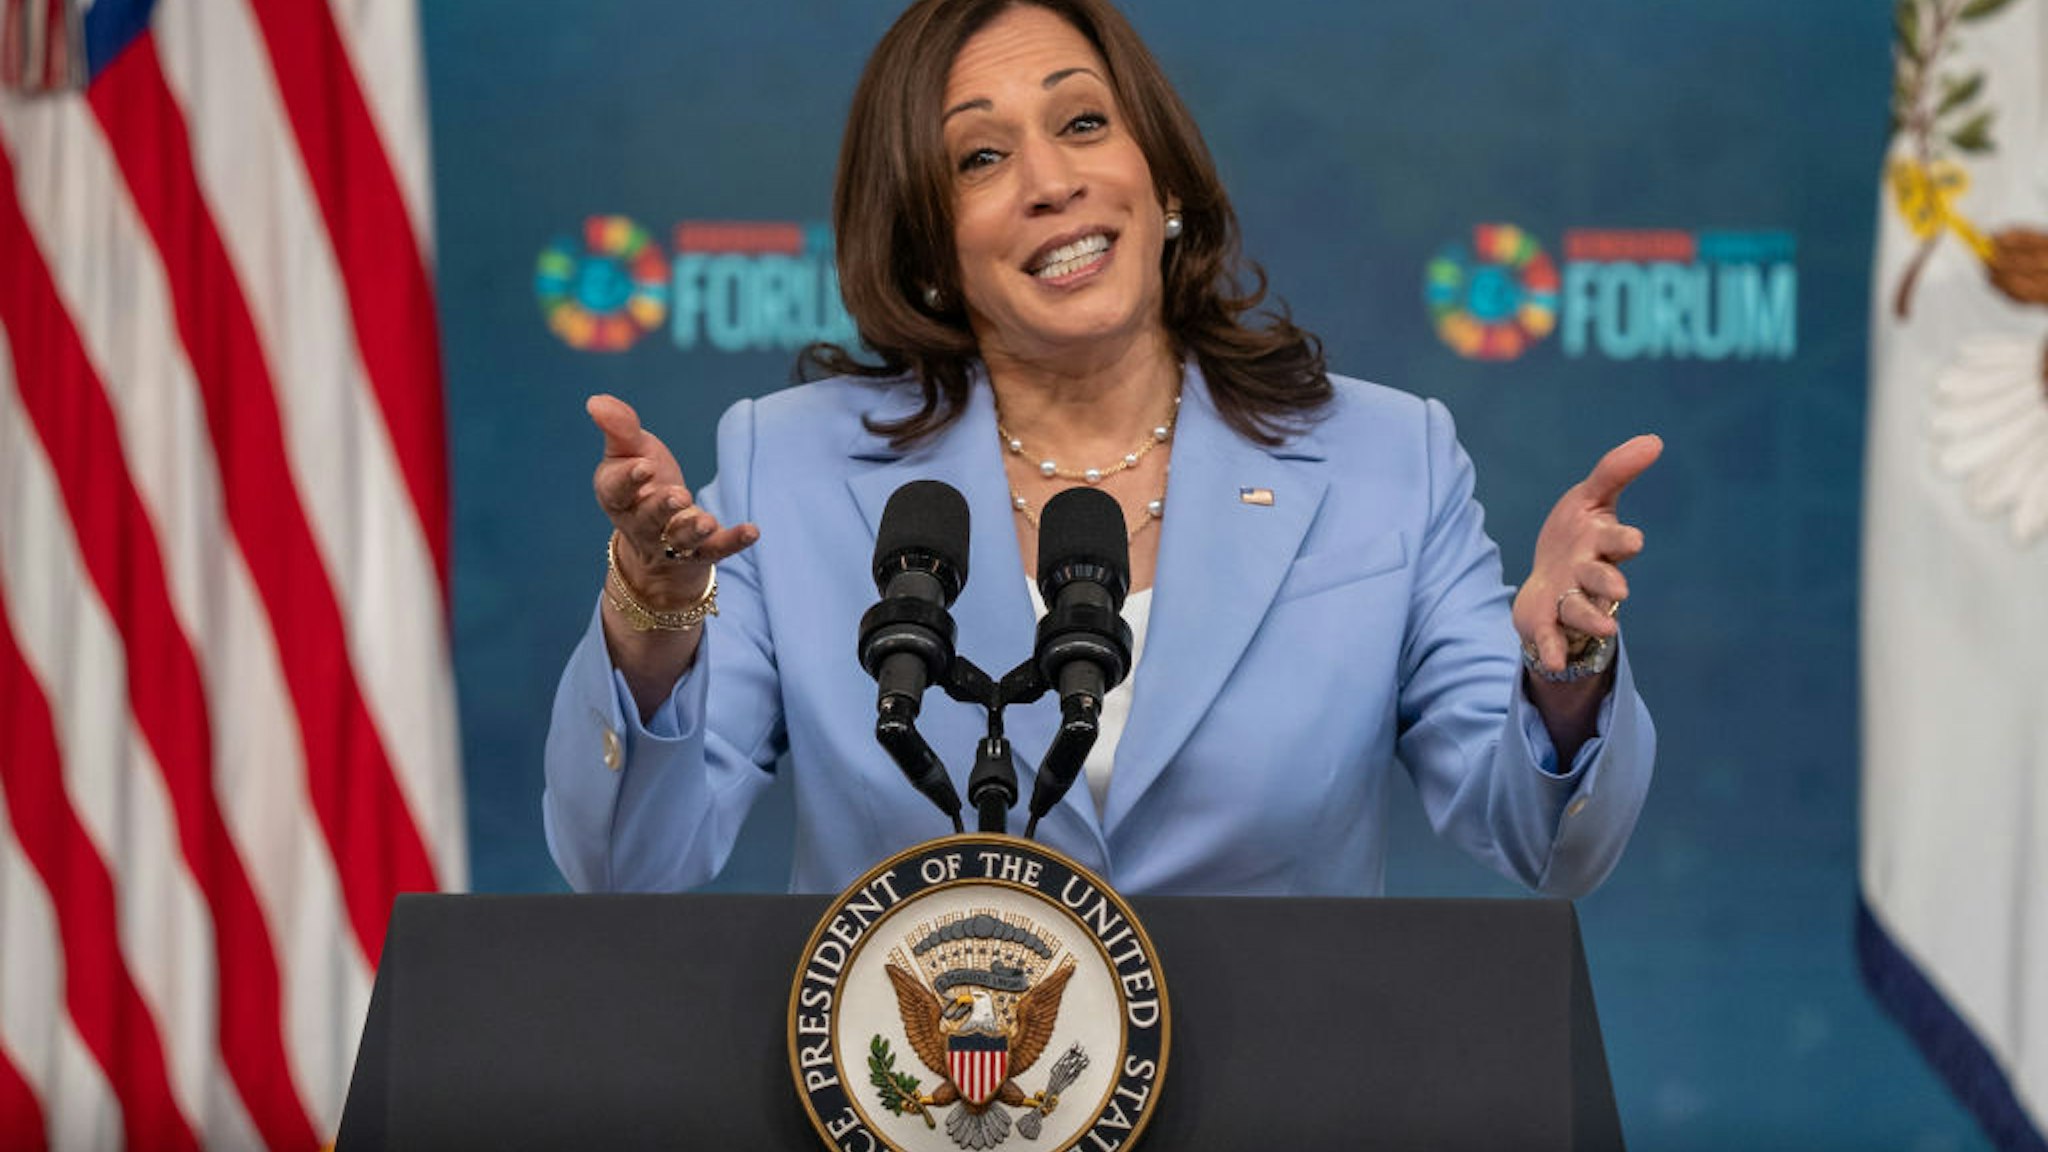 U.S. Vice President Harris speaks during the Generation Equality Forum in the Eisenhower Executive Office Building in Washington, D.C., U.S., on Wednesday, June 30, 2021.